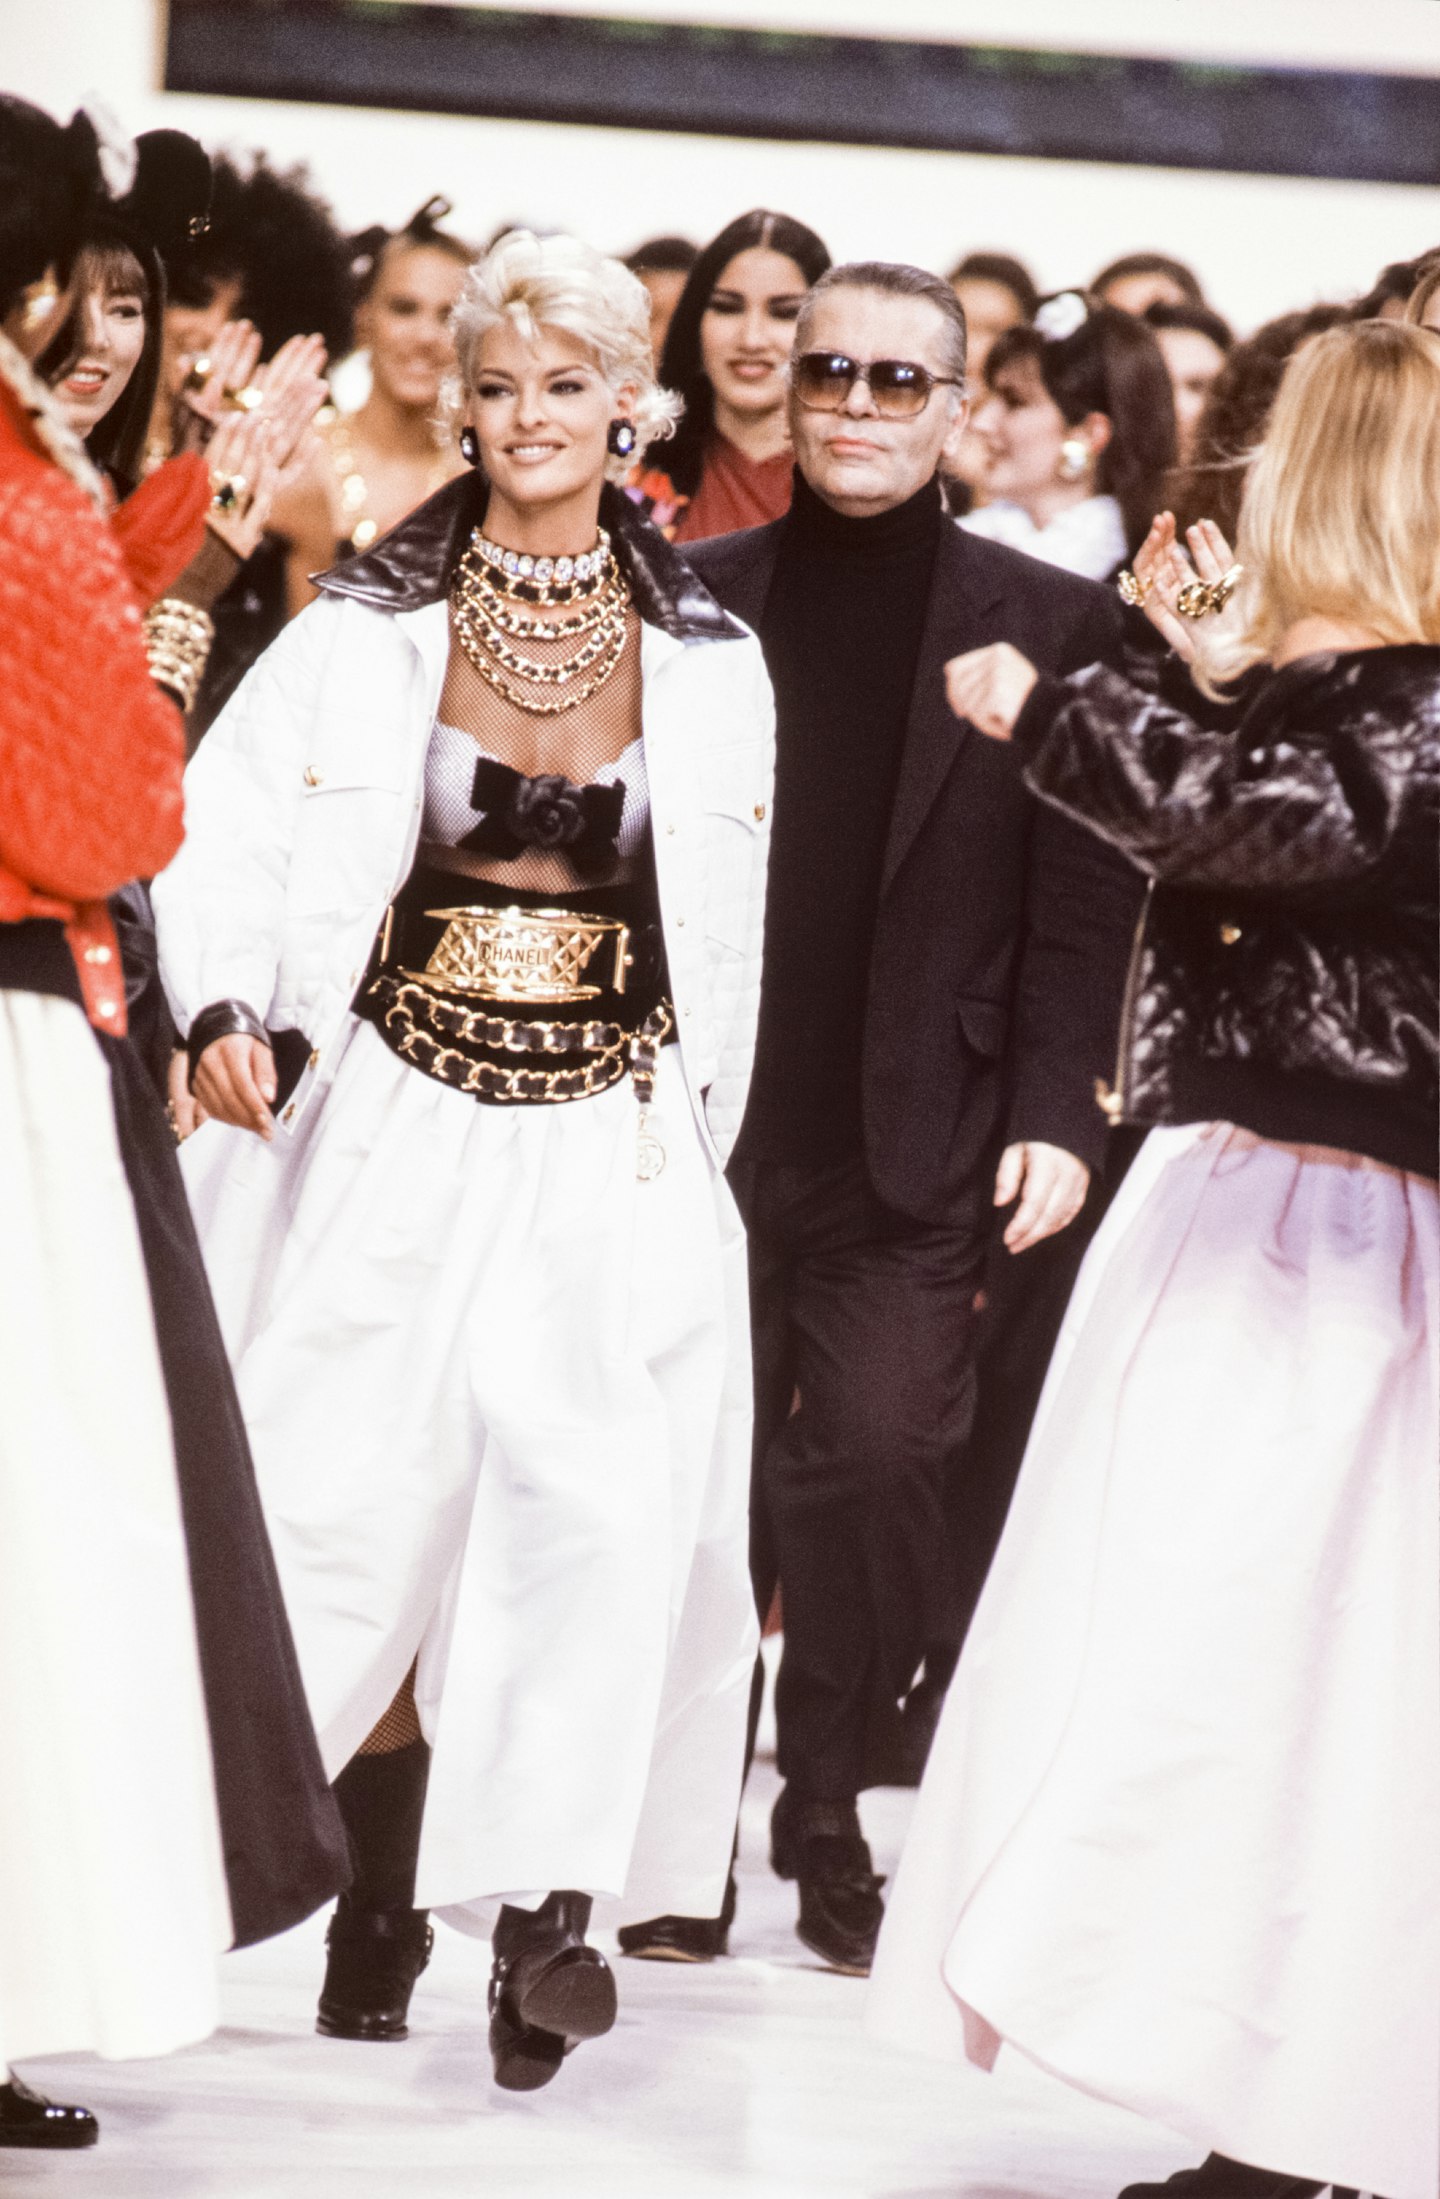 Chanel exhibition catwalk moments Linda Evangelista and Karl Lagerfeld For Chanel Fall/Winter 1991/1992